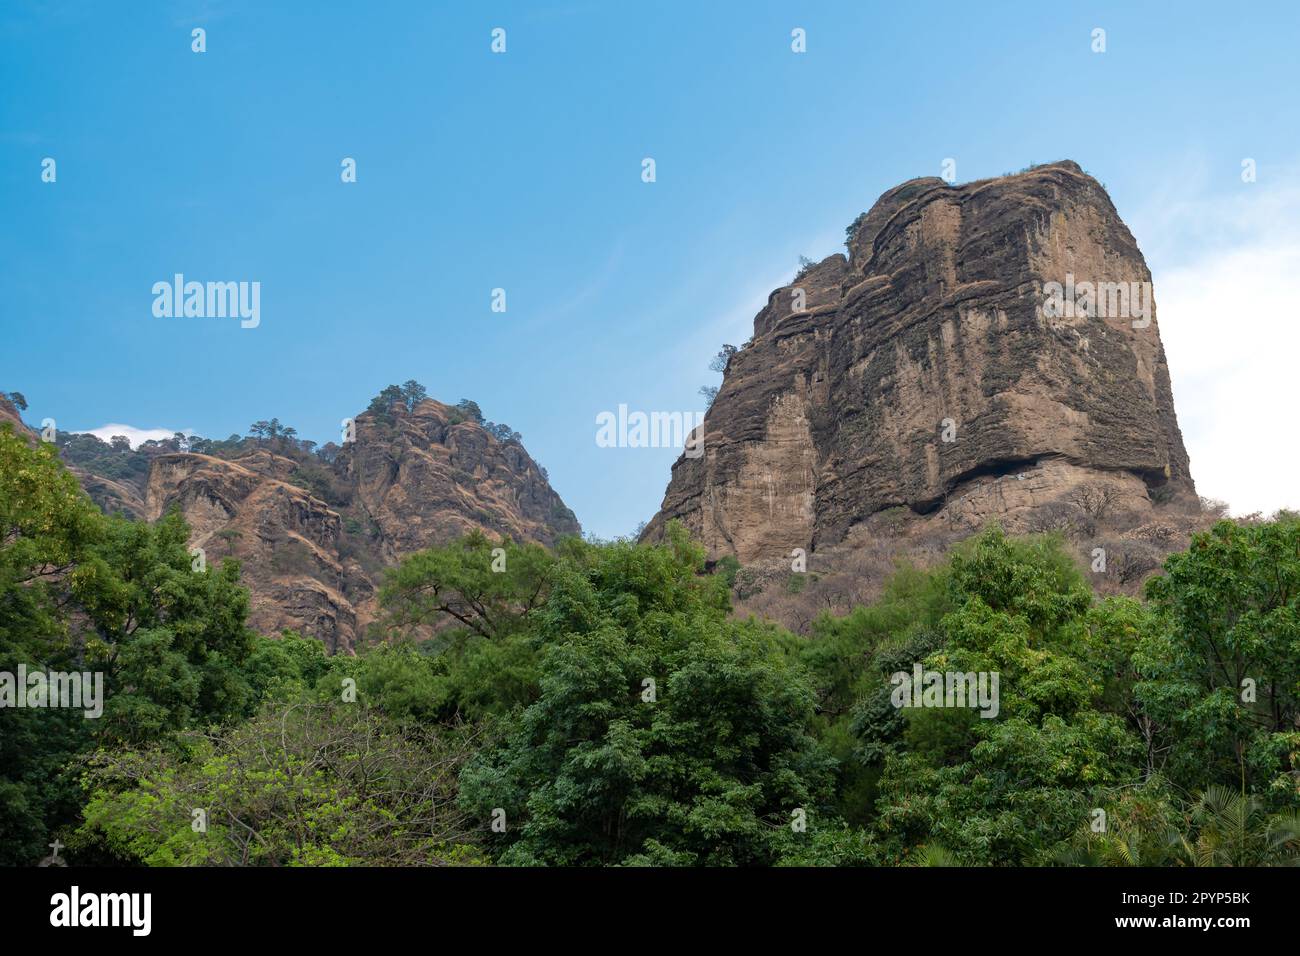 mexico, panoramic, scenery, ecology, high, scape, rock, reserve, rural, saw, scenic, hill, nature, green, destination, scenic view, mountain, landscap Stock Photo